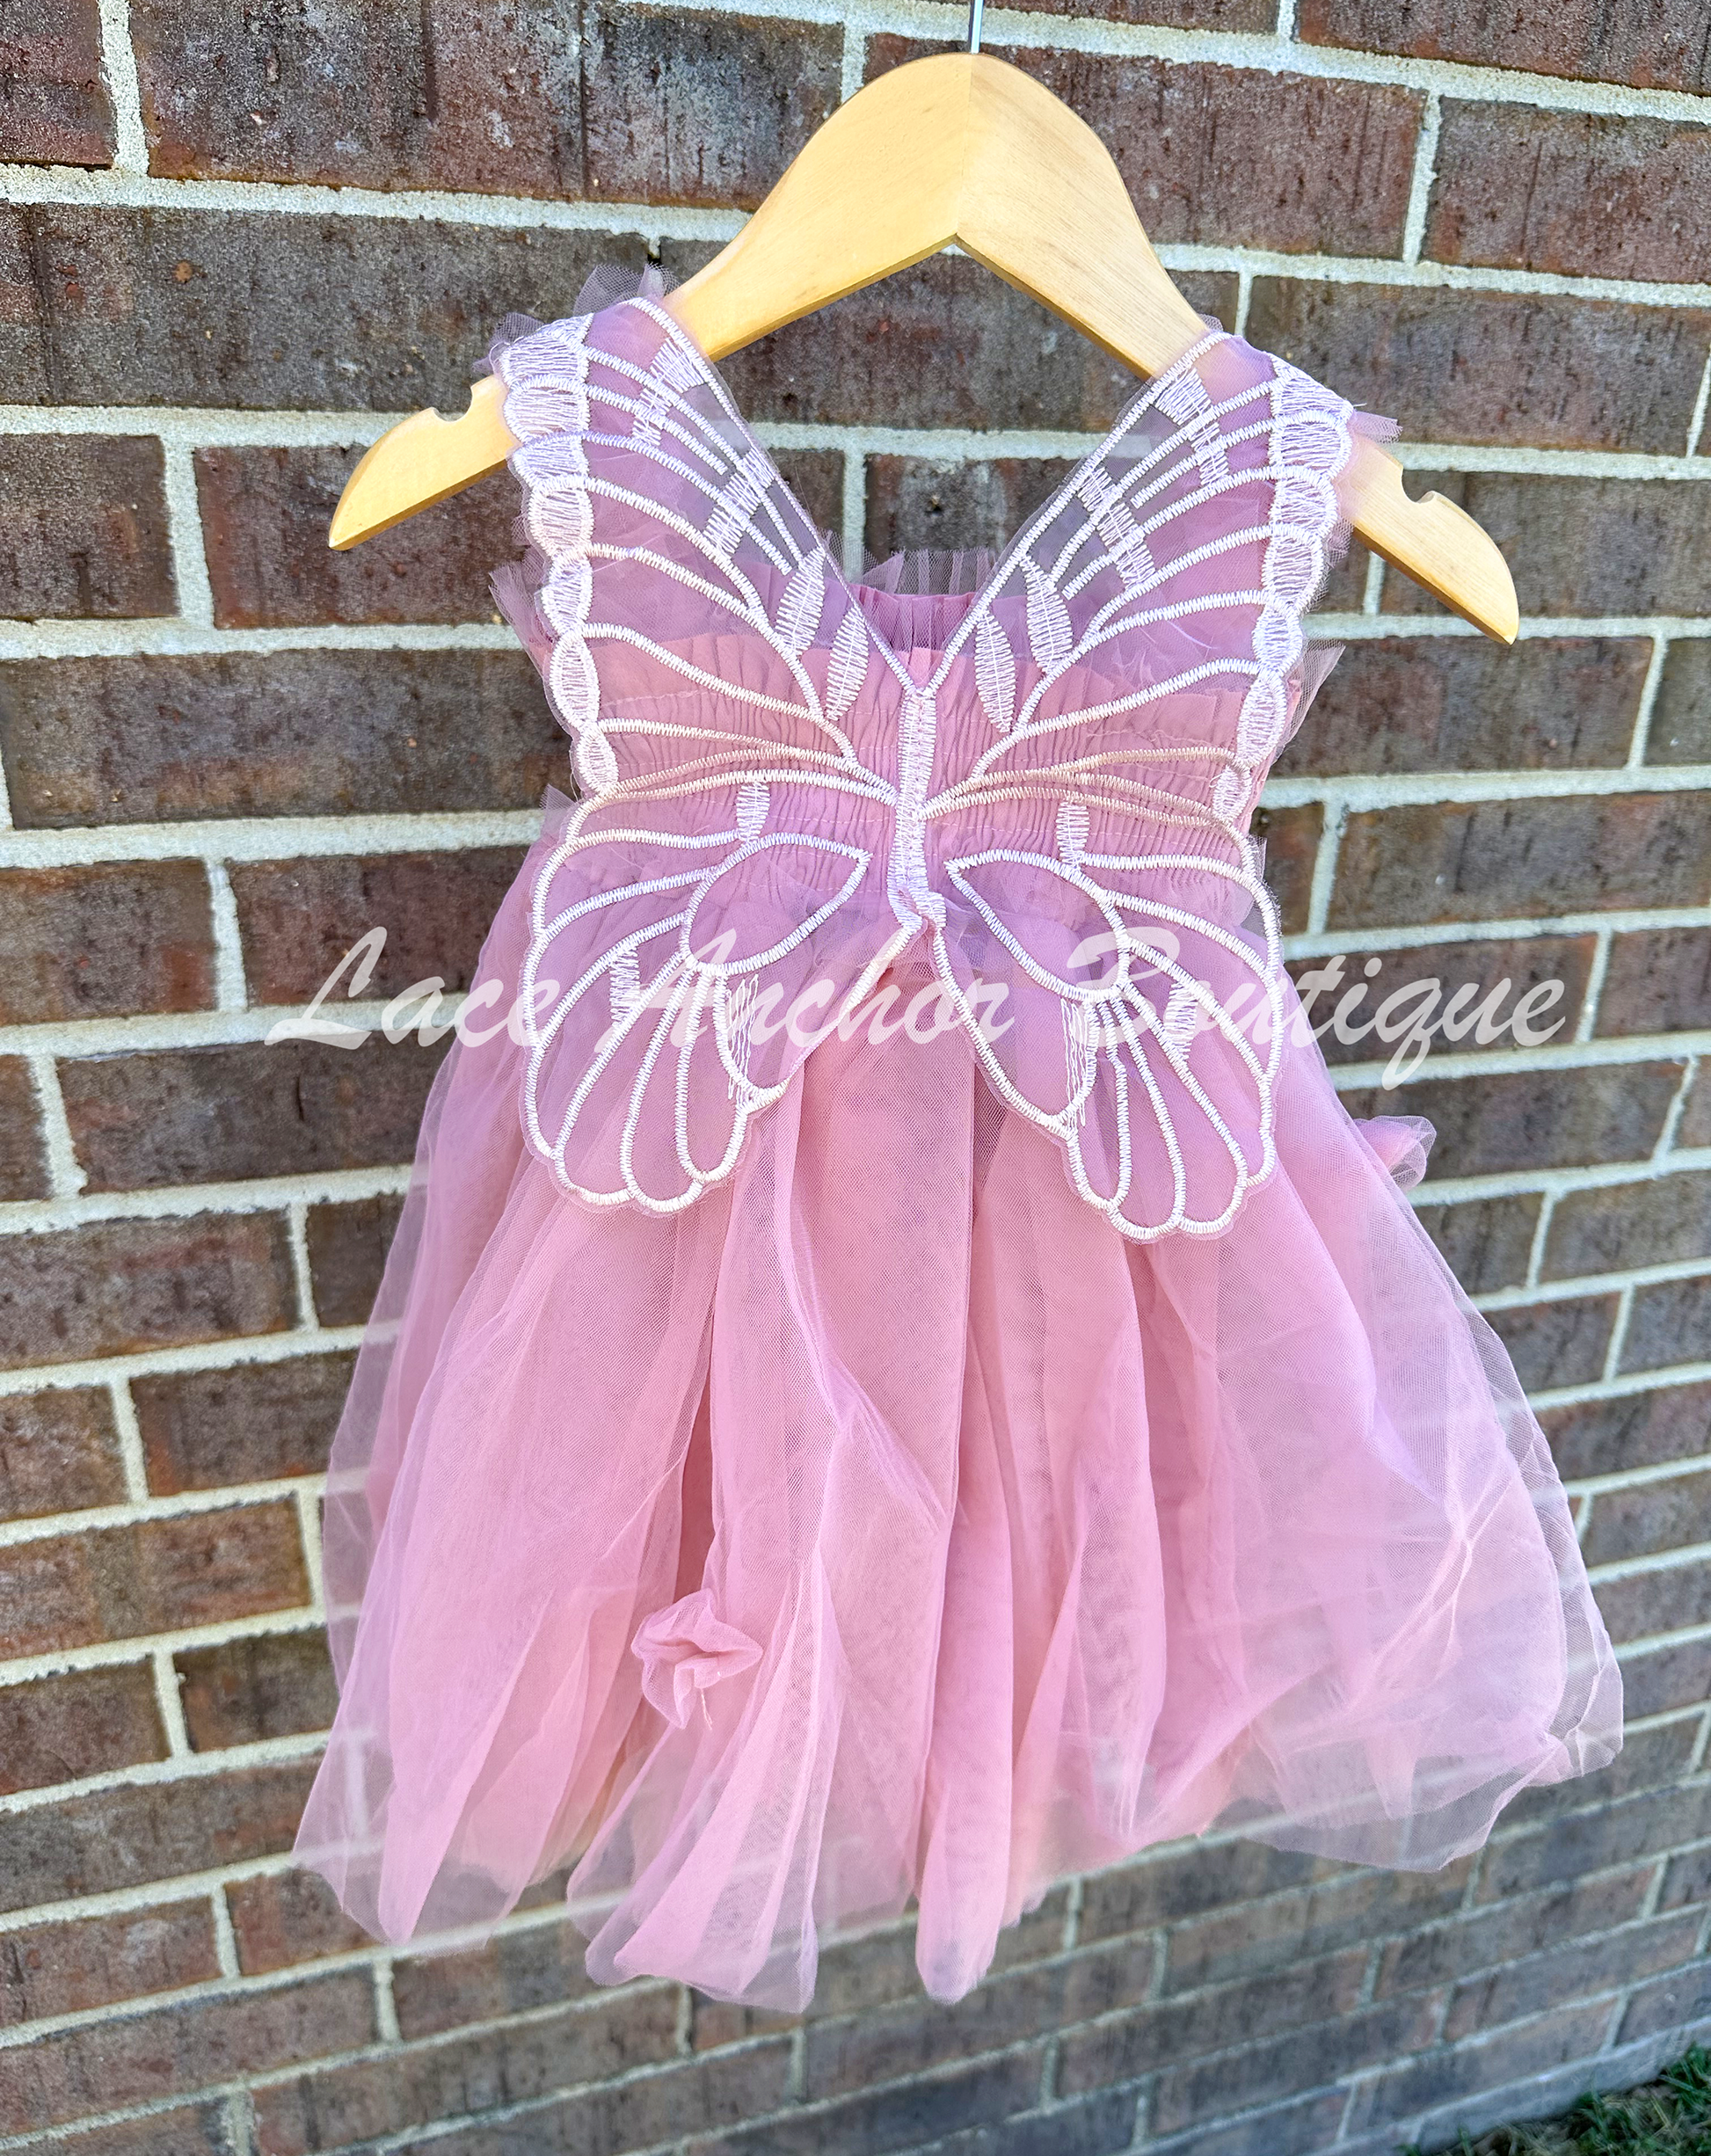 Mauve pink tulle fairy girls dress with smocked top and tulle flowers on skirt. Attached butterfly wings and ruffled straps.